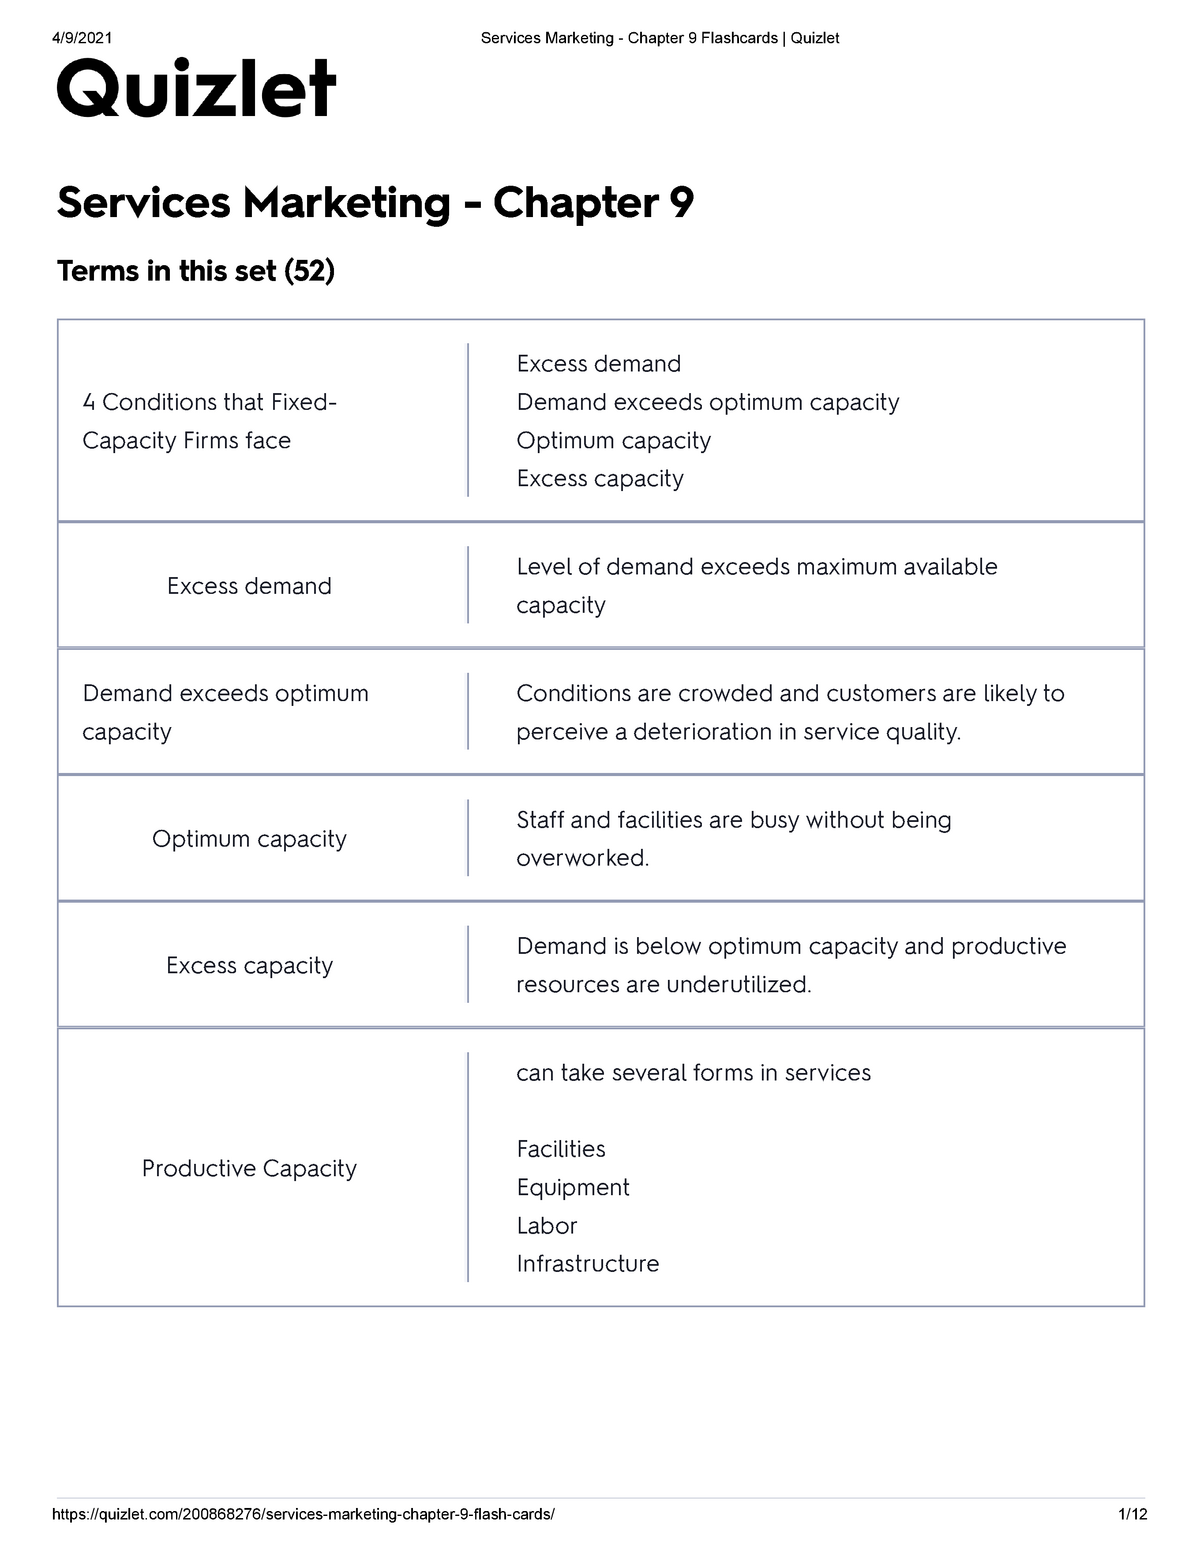 principles of marketing chapter 9 quizlet